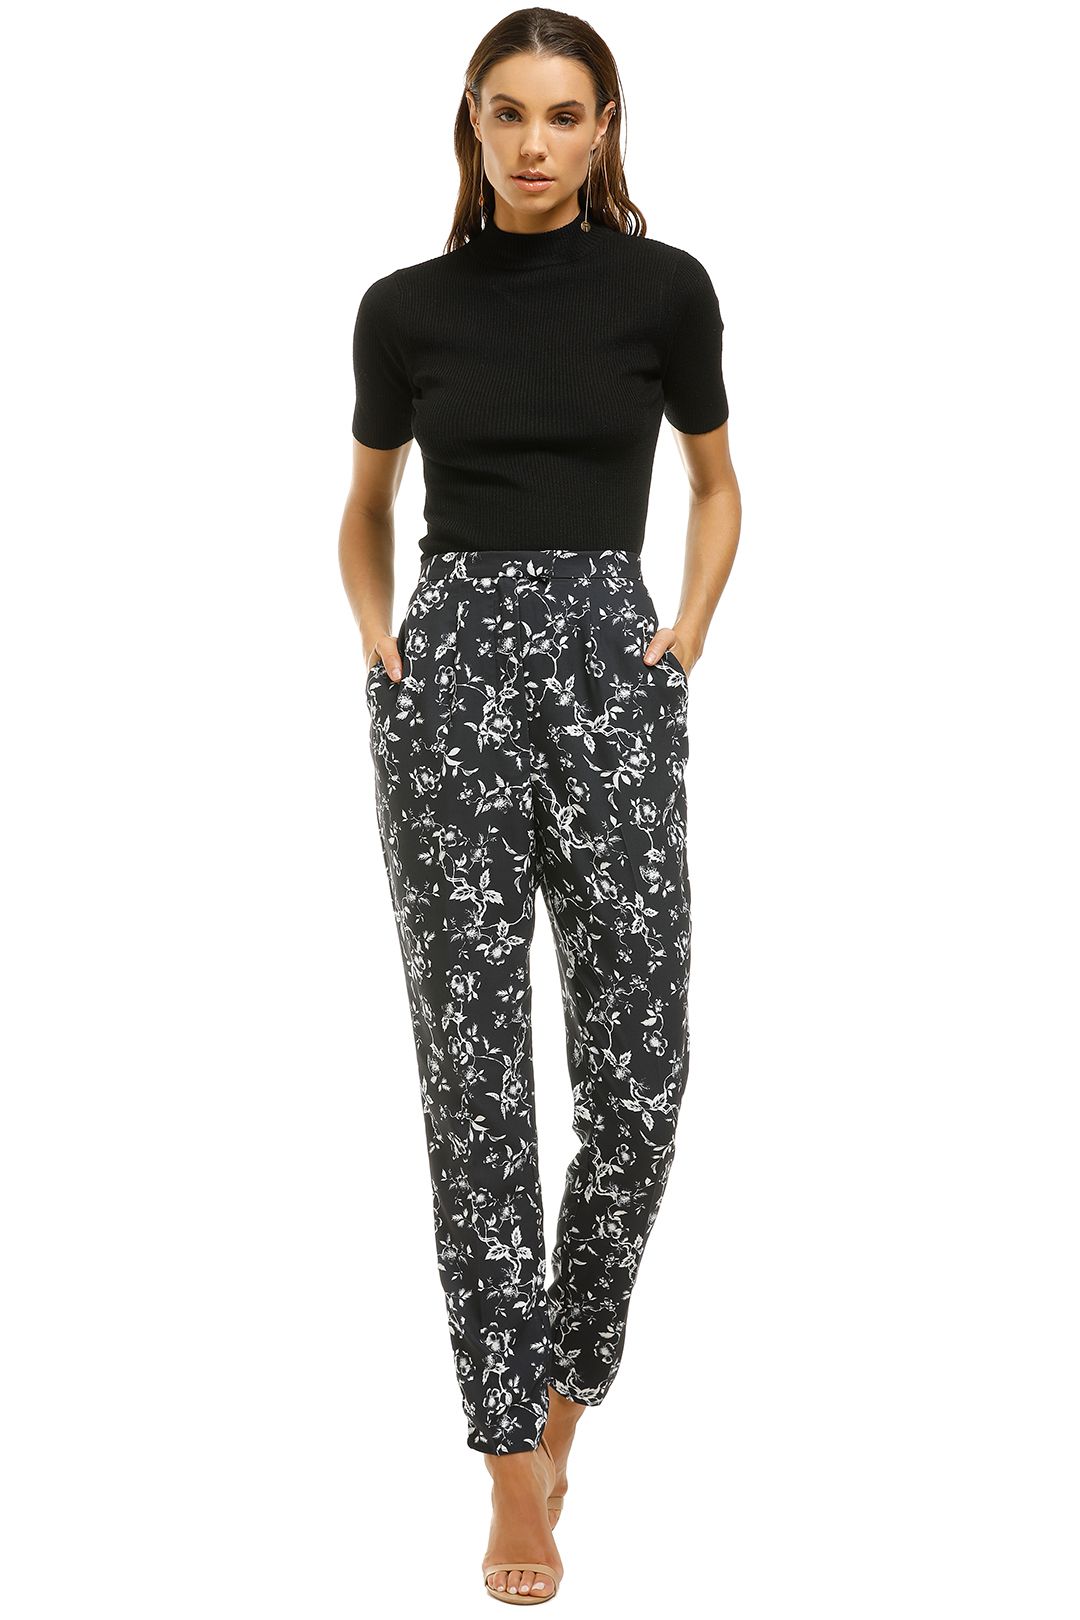 Keepsake-The-Label-Watcher-Pant-Navy-Floral-Front